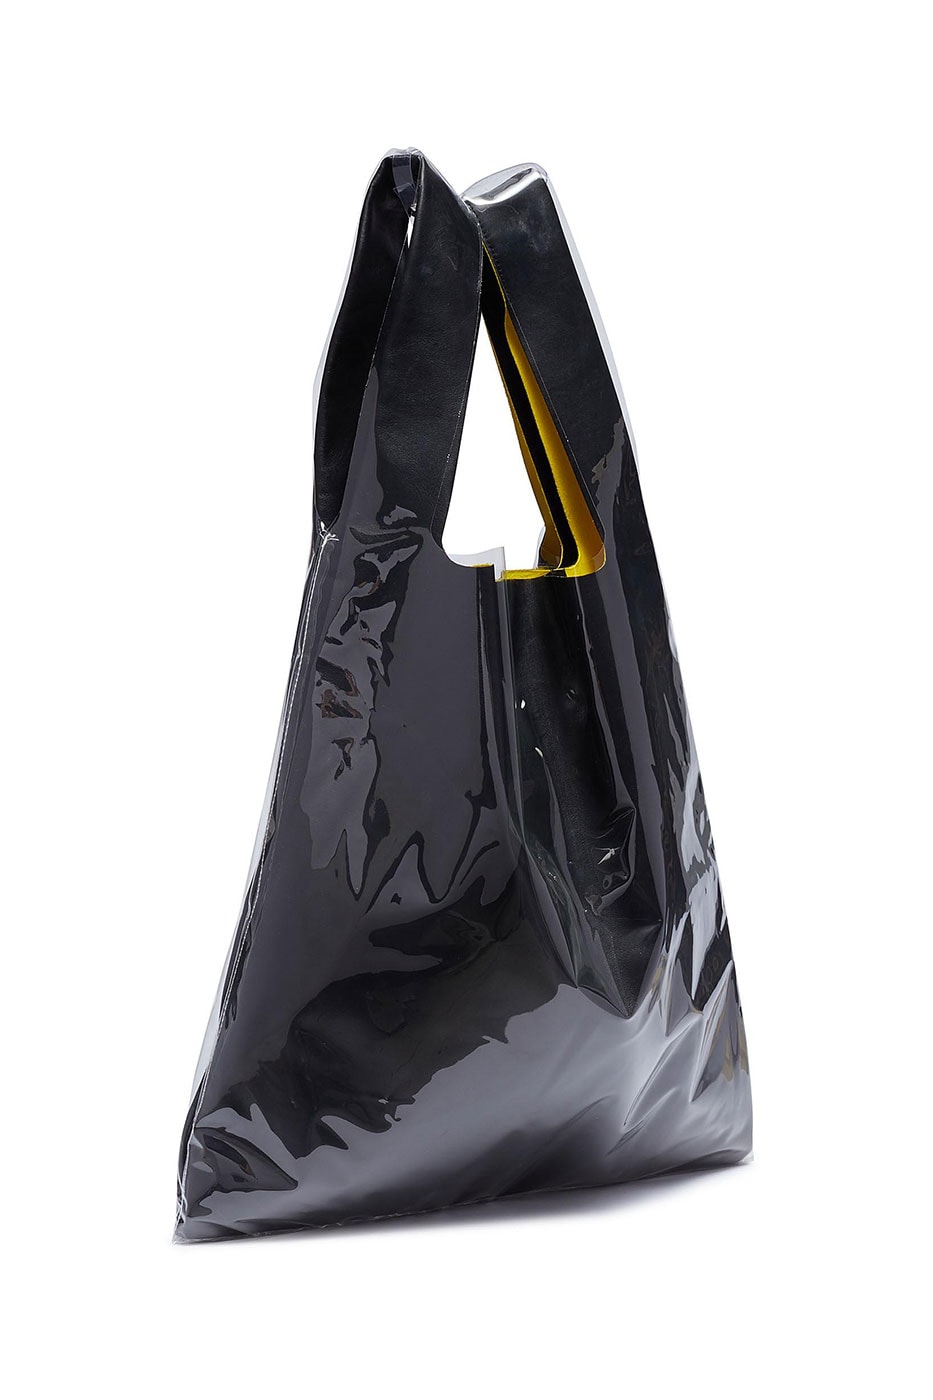 Maison Margiela PVC Coated Leather Tote Bag price purchase online black dark beige accessories